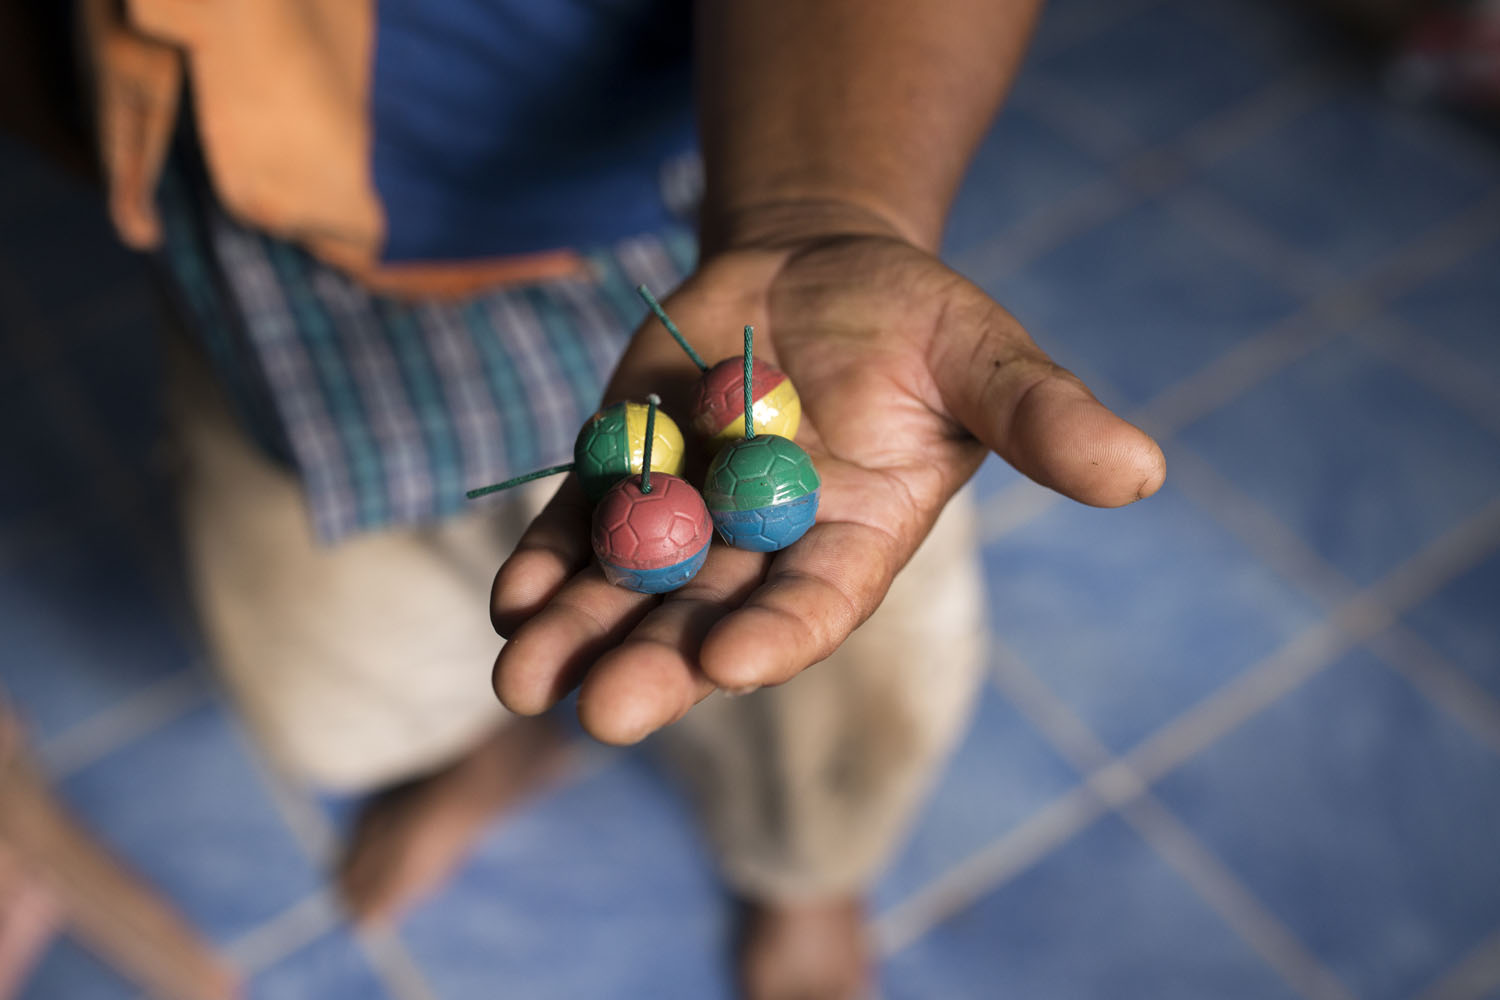 A wildlife volunteer displays the small but extremely loud fireworks used to scare off elephants in the event of an encounter. Many villagers in Kaeng Hang Meao choose instead to use pots and pans to disperse the animals.